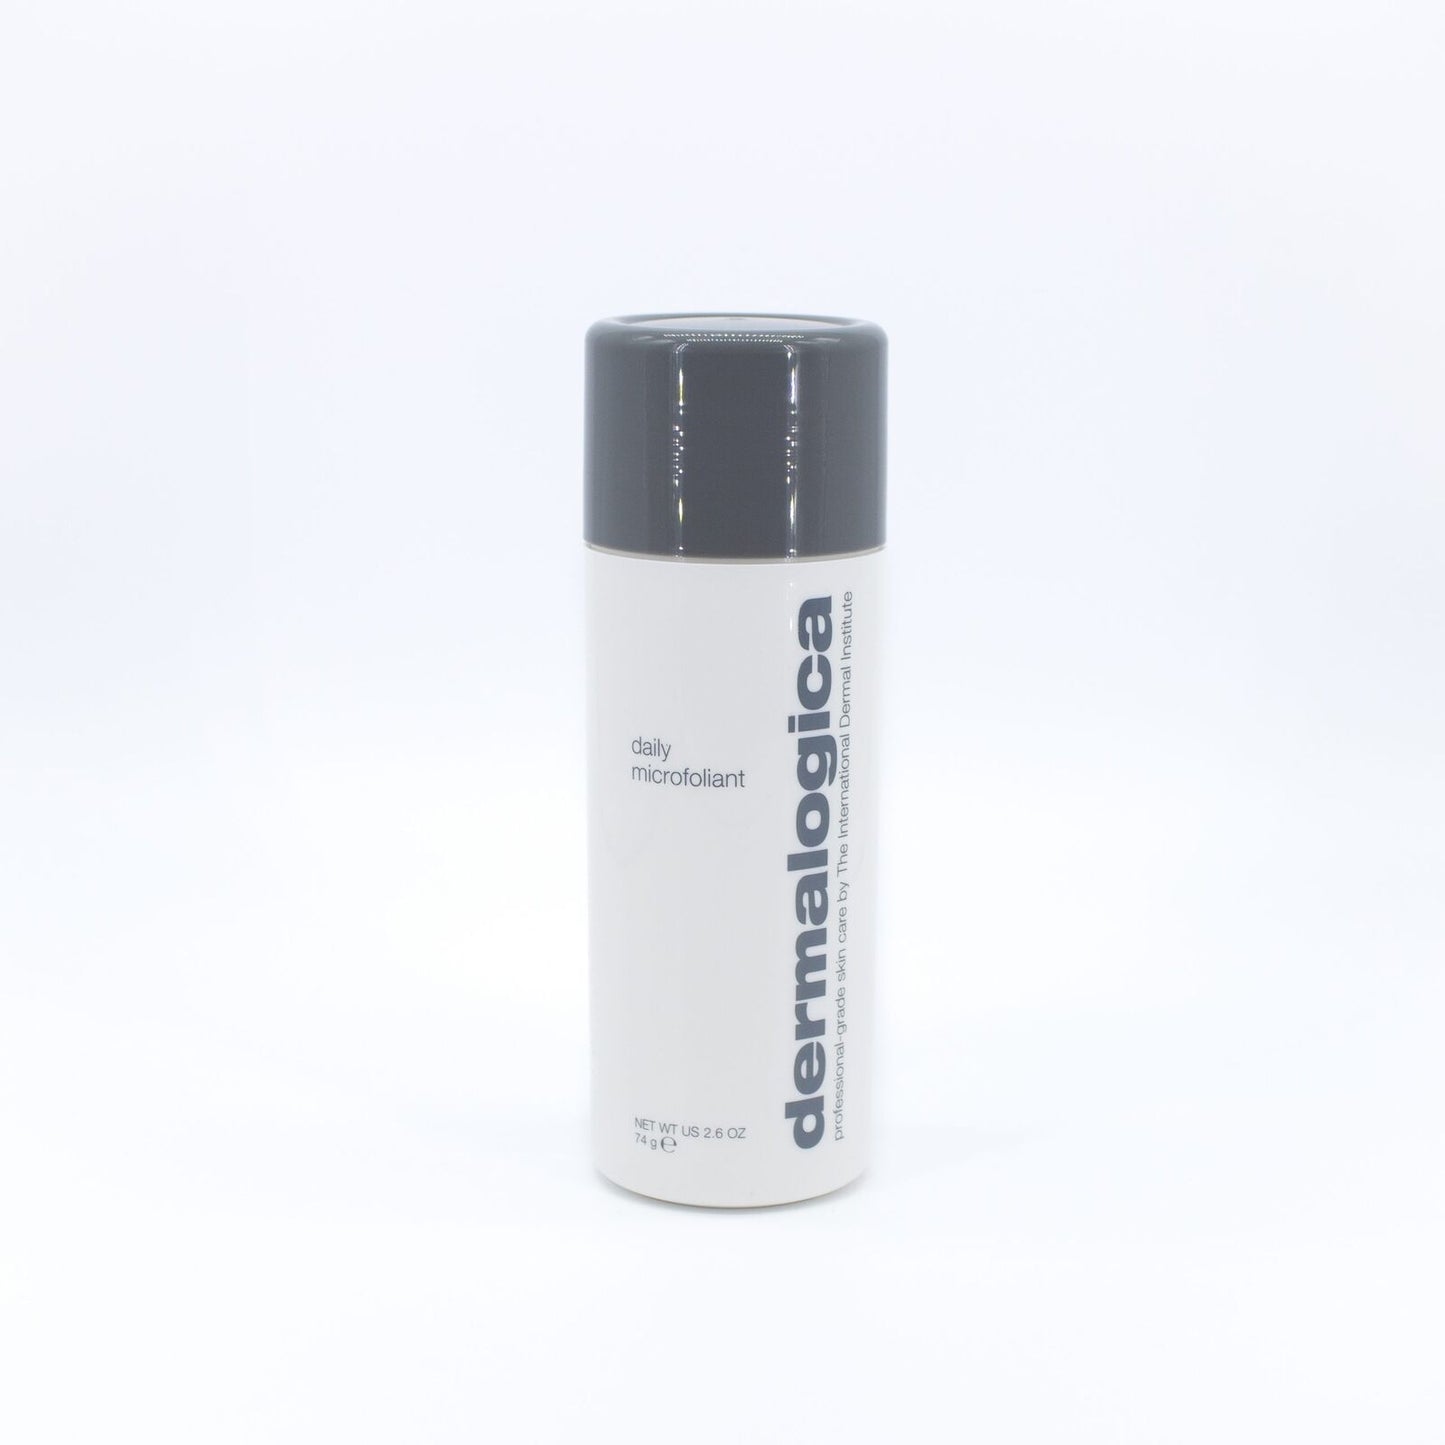 dermalogica Daily Microfoliant 2.6oz - Small Amount Missing